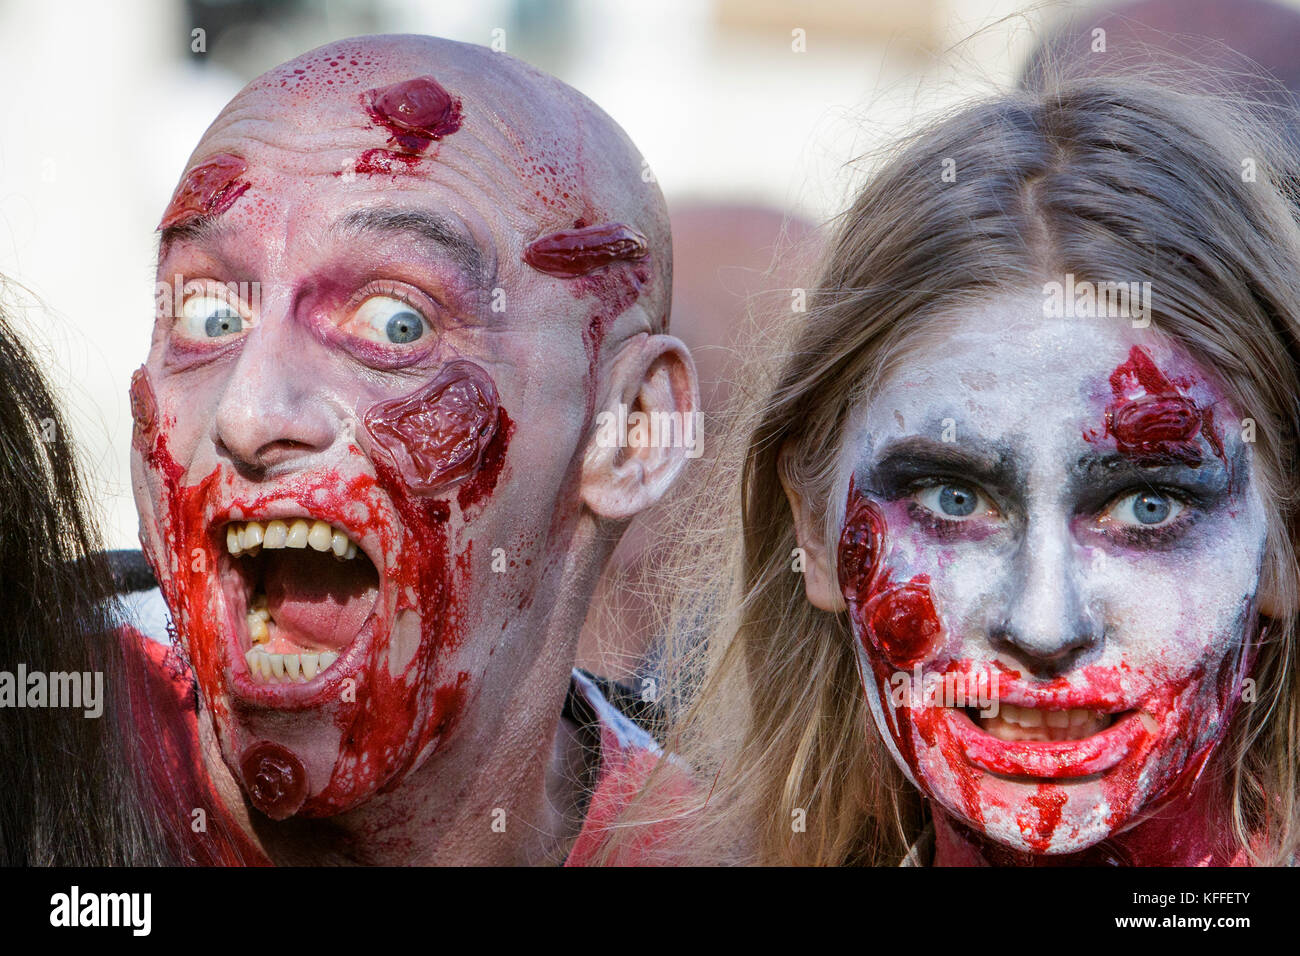 Bristol, UK. 28th Oct, 2017. A man and a woman dressed as zombies are pictured as they participate in a zombie walk through the city centre. Stock Photo